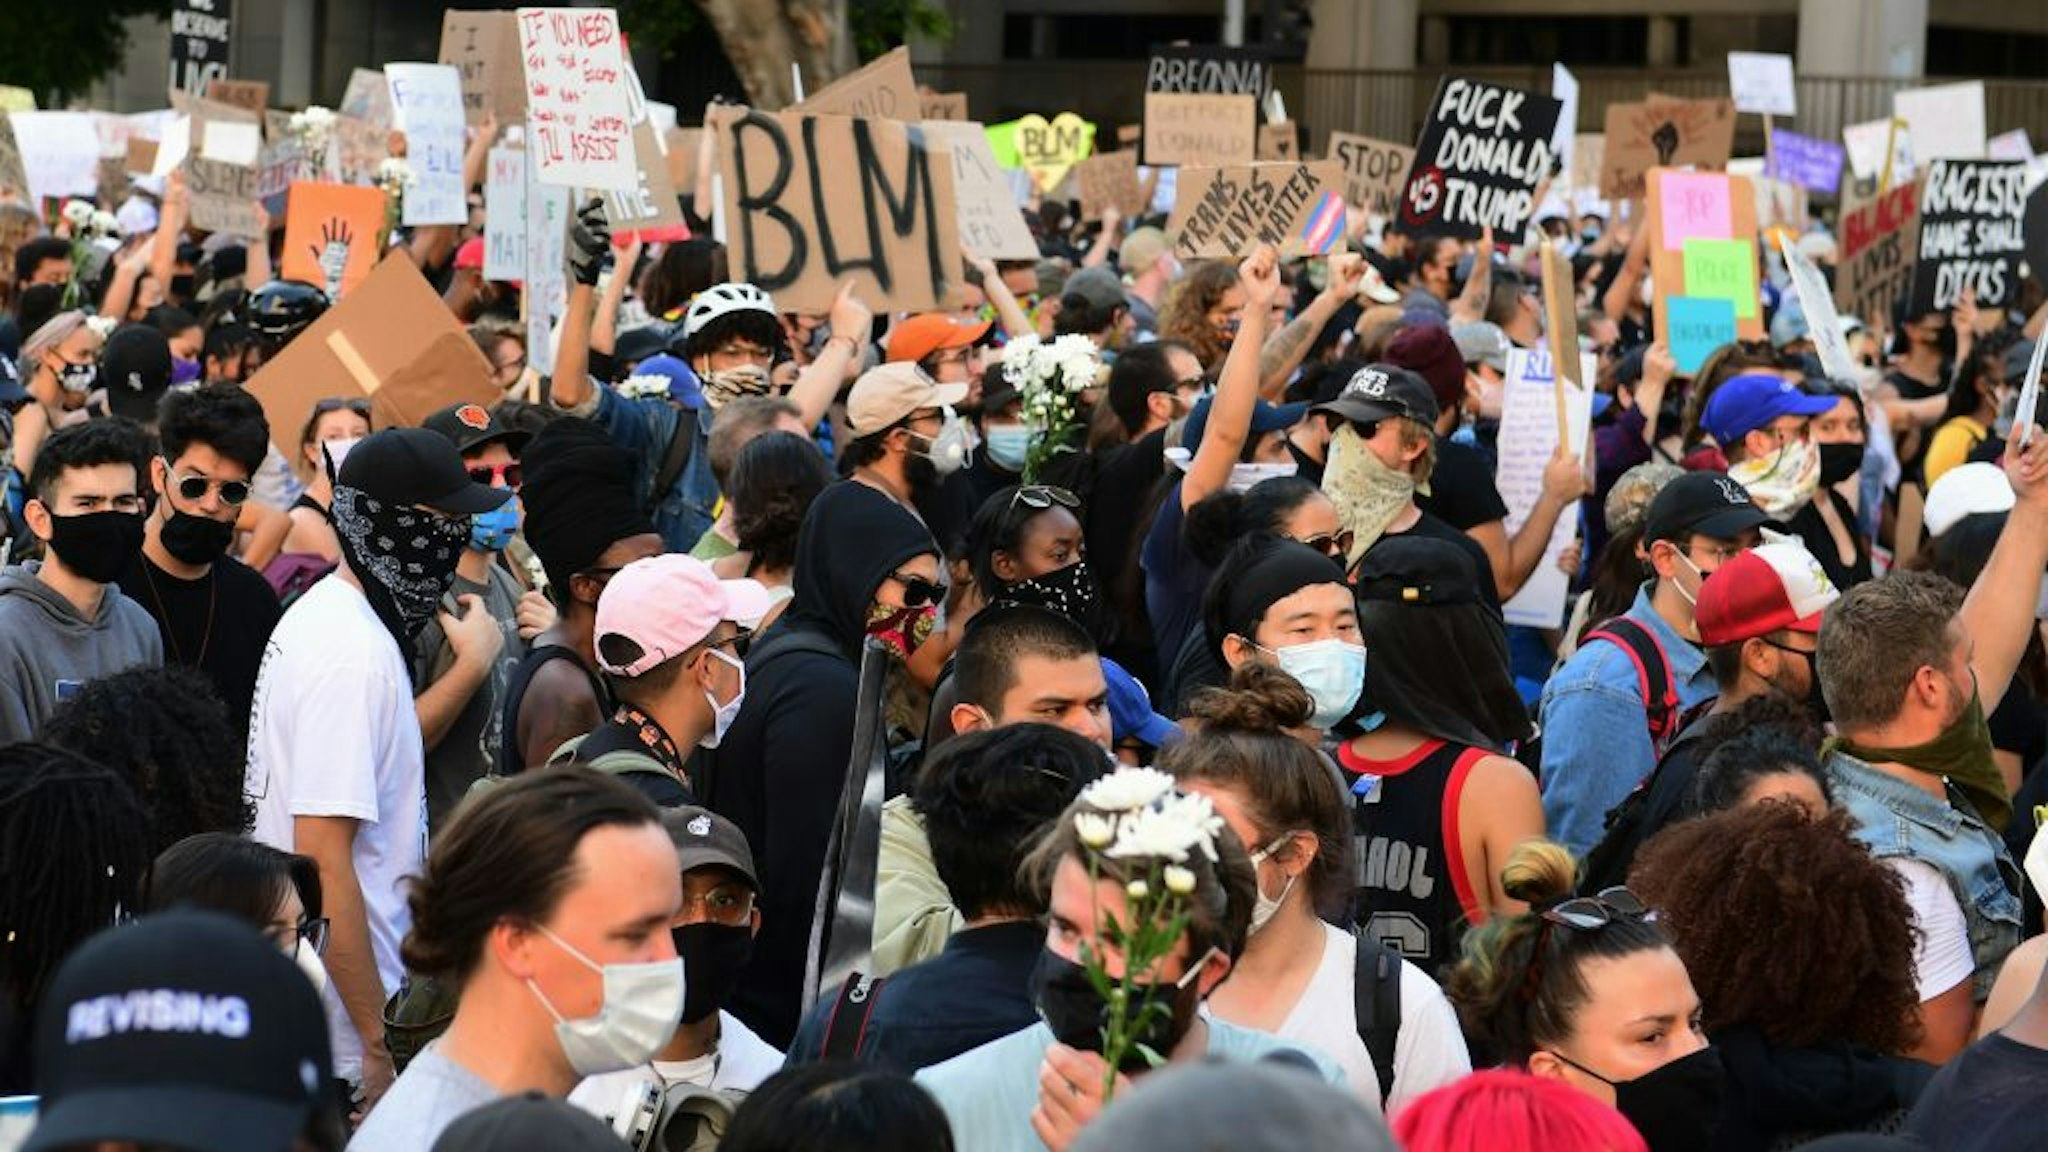 A large crowd of demonstrators rally in front of the District Attorney's office protesting the death of George Floyd, who died in police custody, on June 3, 2020 in Los Angeles.